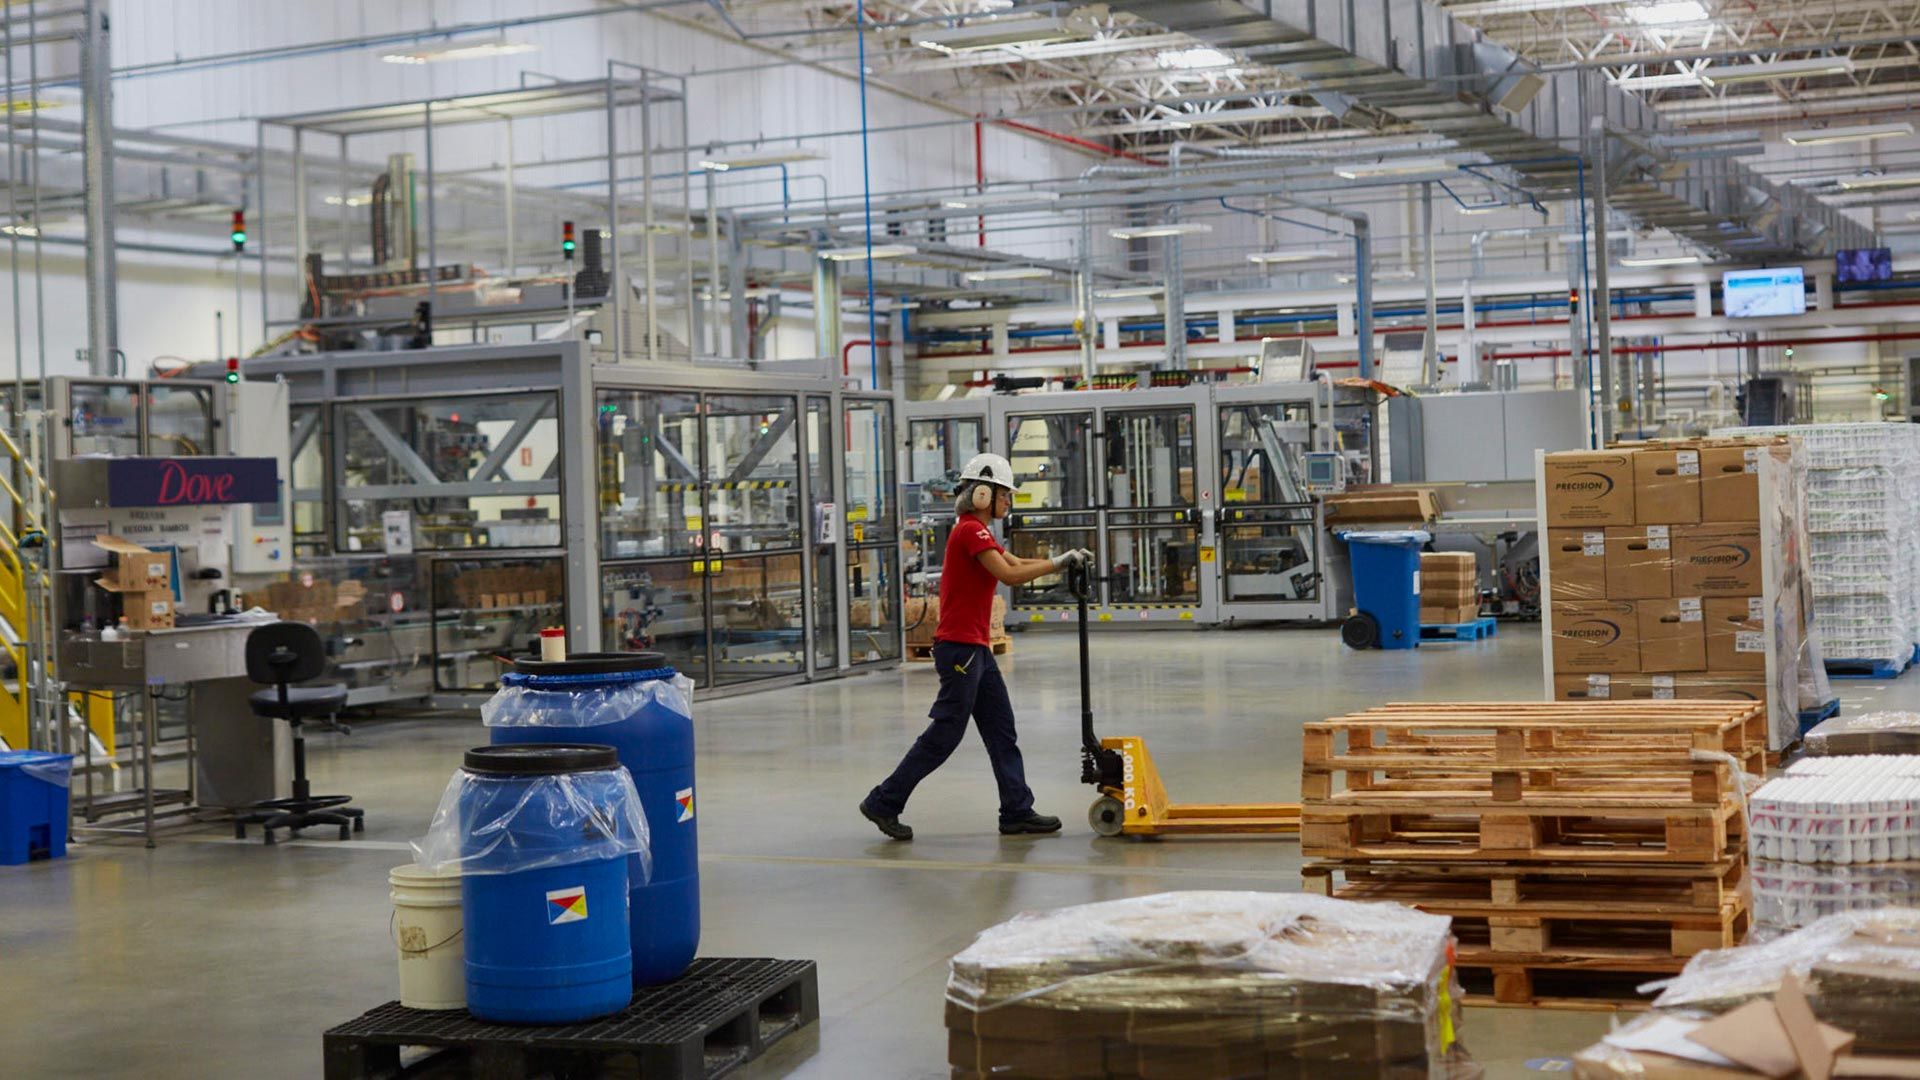 A person wearing a hardhat pushes a trolley across a factory floor